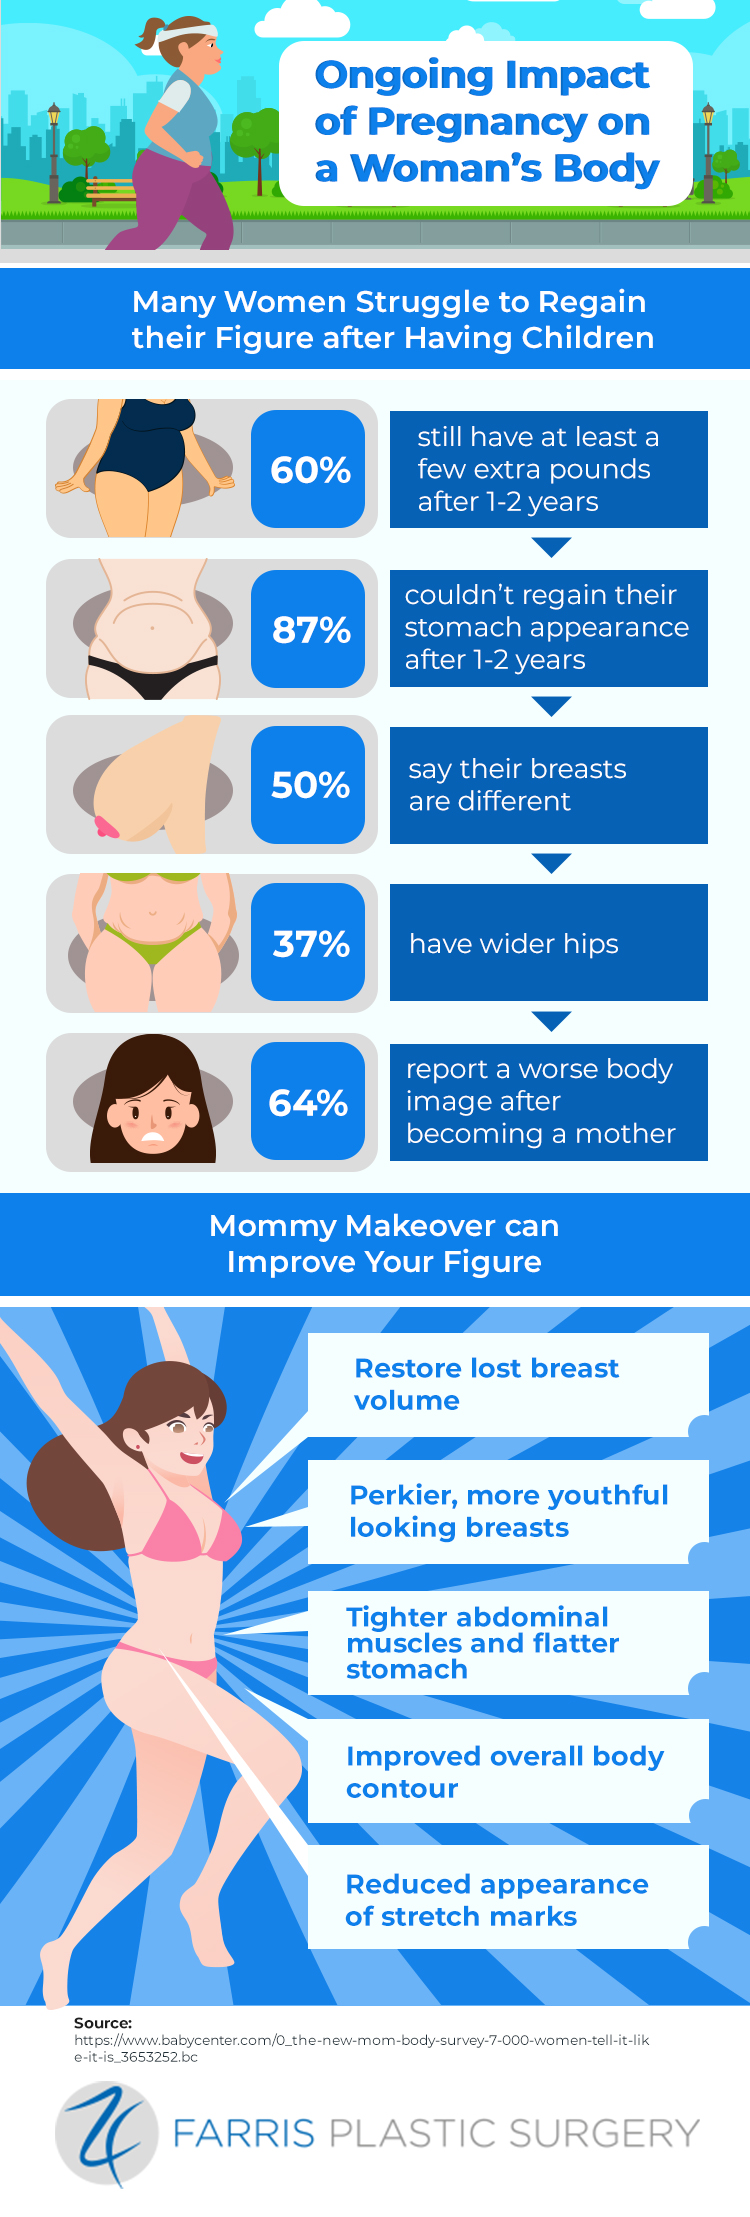 infographic highlighting the impact of pregnancy on a woman's body and the benefits of a mommy makeover